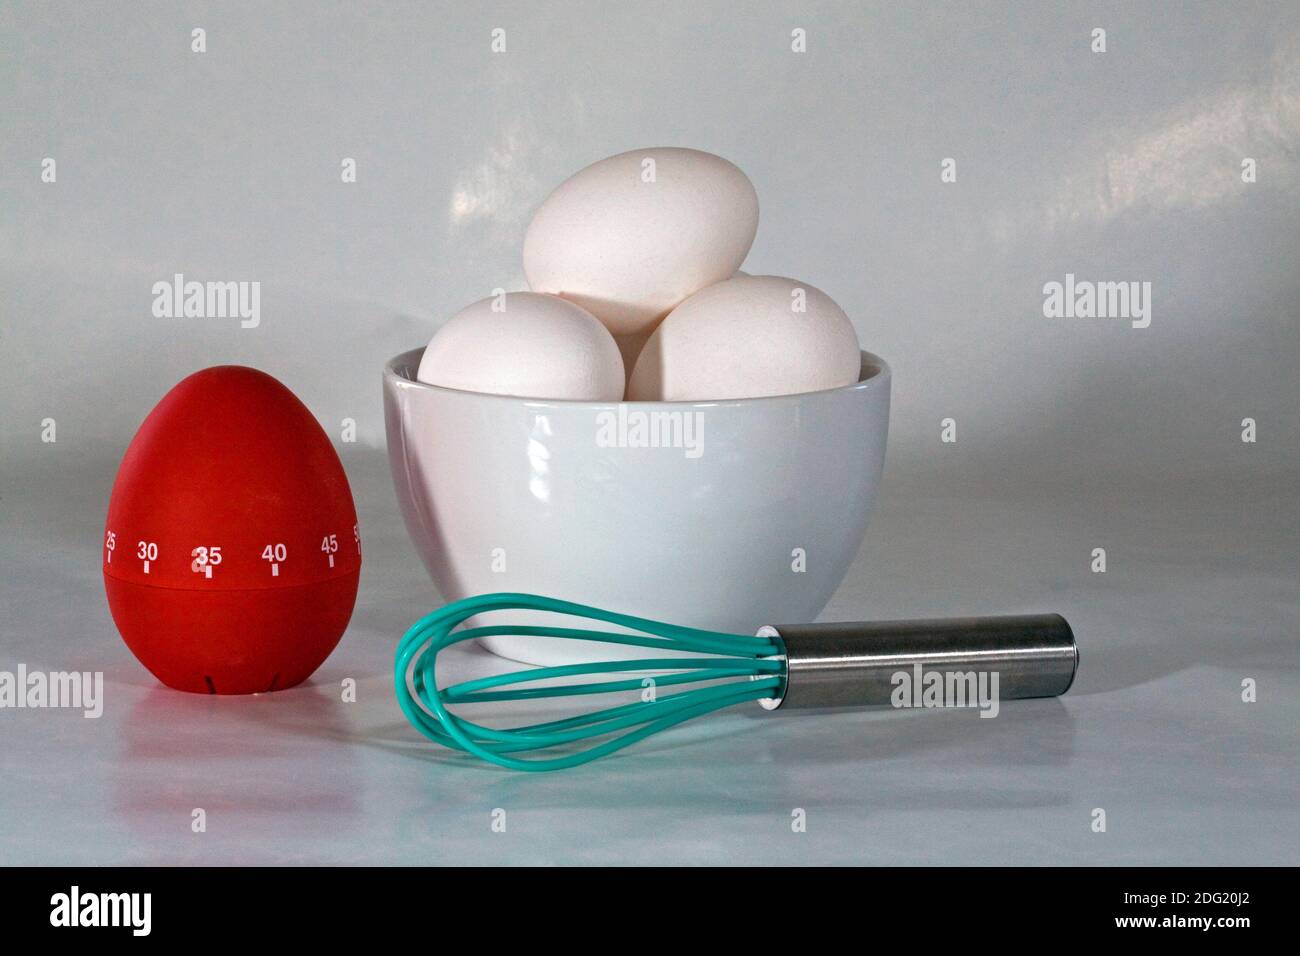 Fresh eggs, a stirring device, and an egg timer, to prepare a healthy breakfast. Stock Photo